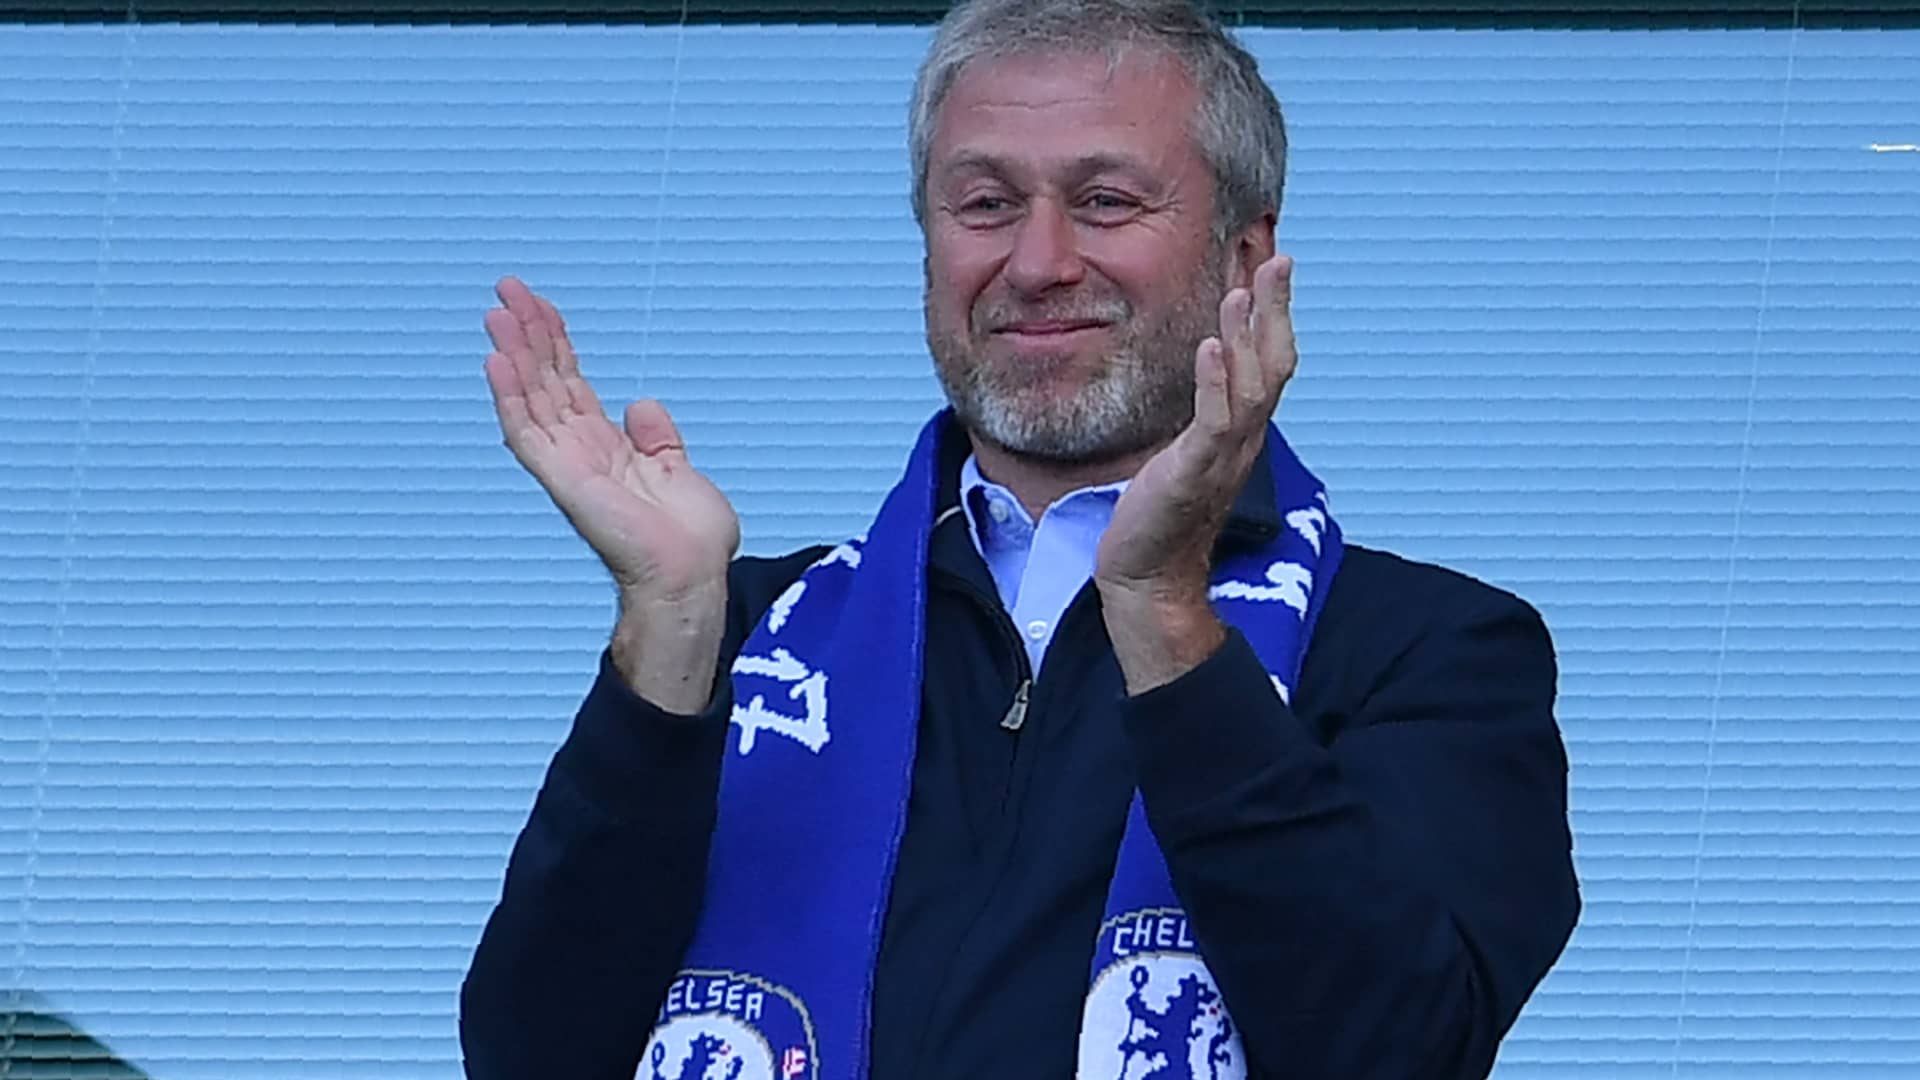 Chelsea's Russian owner Roman Abramovich applauds as players celebrate their league title win at the end of the Premier League football match between Chelsea and Sunderland at Stamford Bridge in London on May 21, 2017.